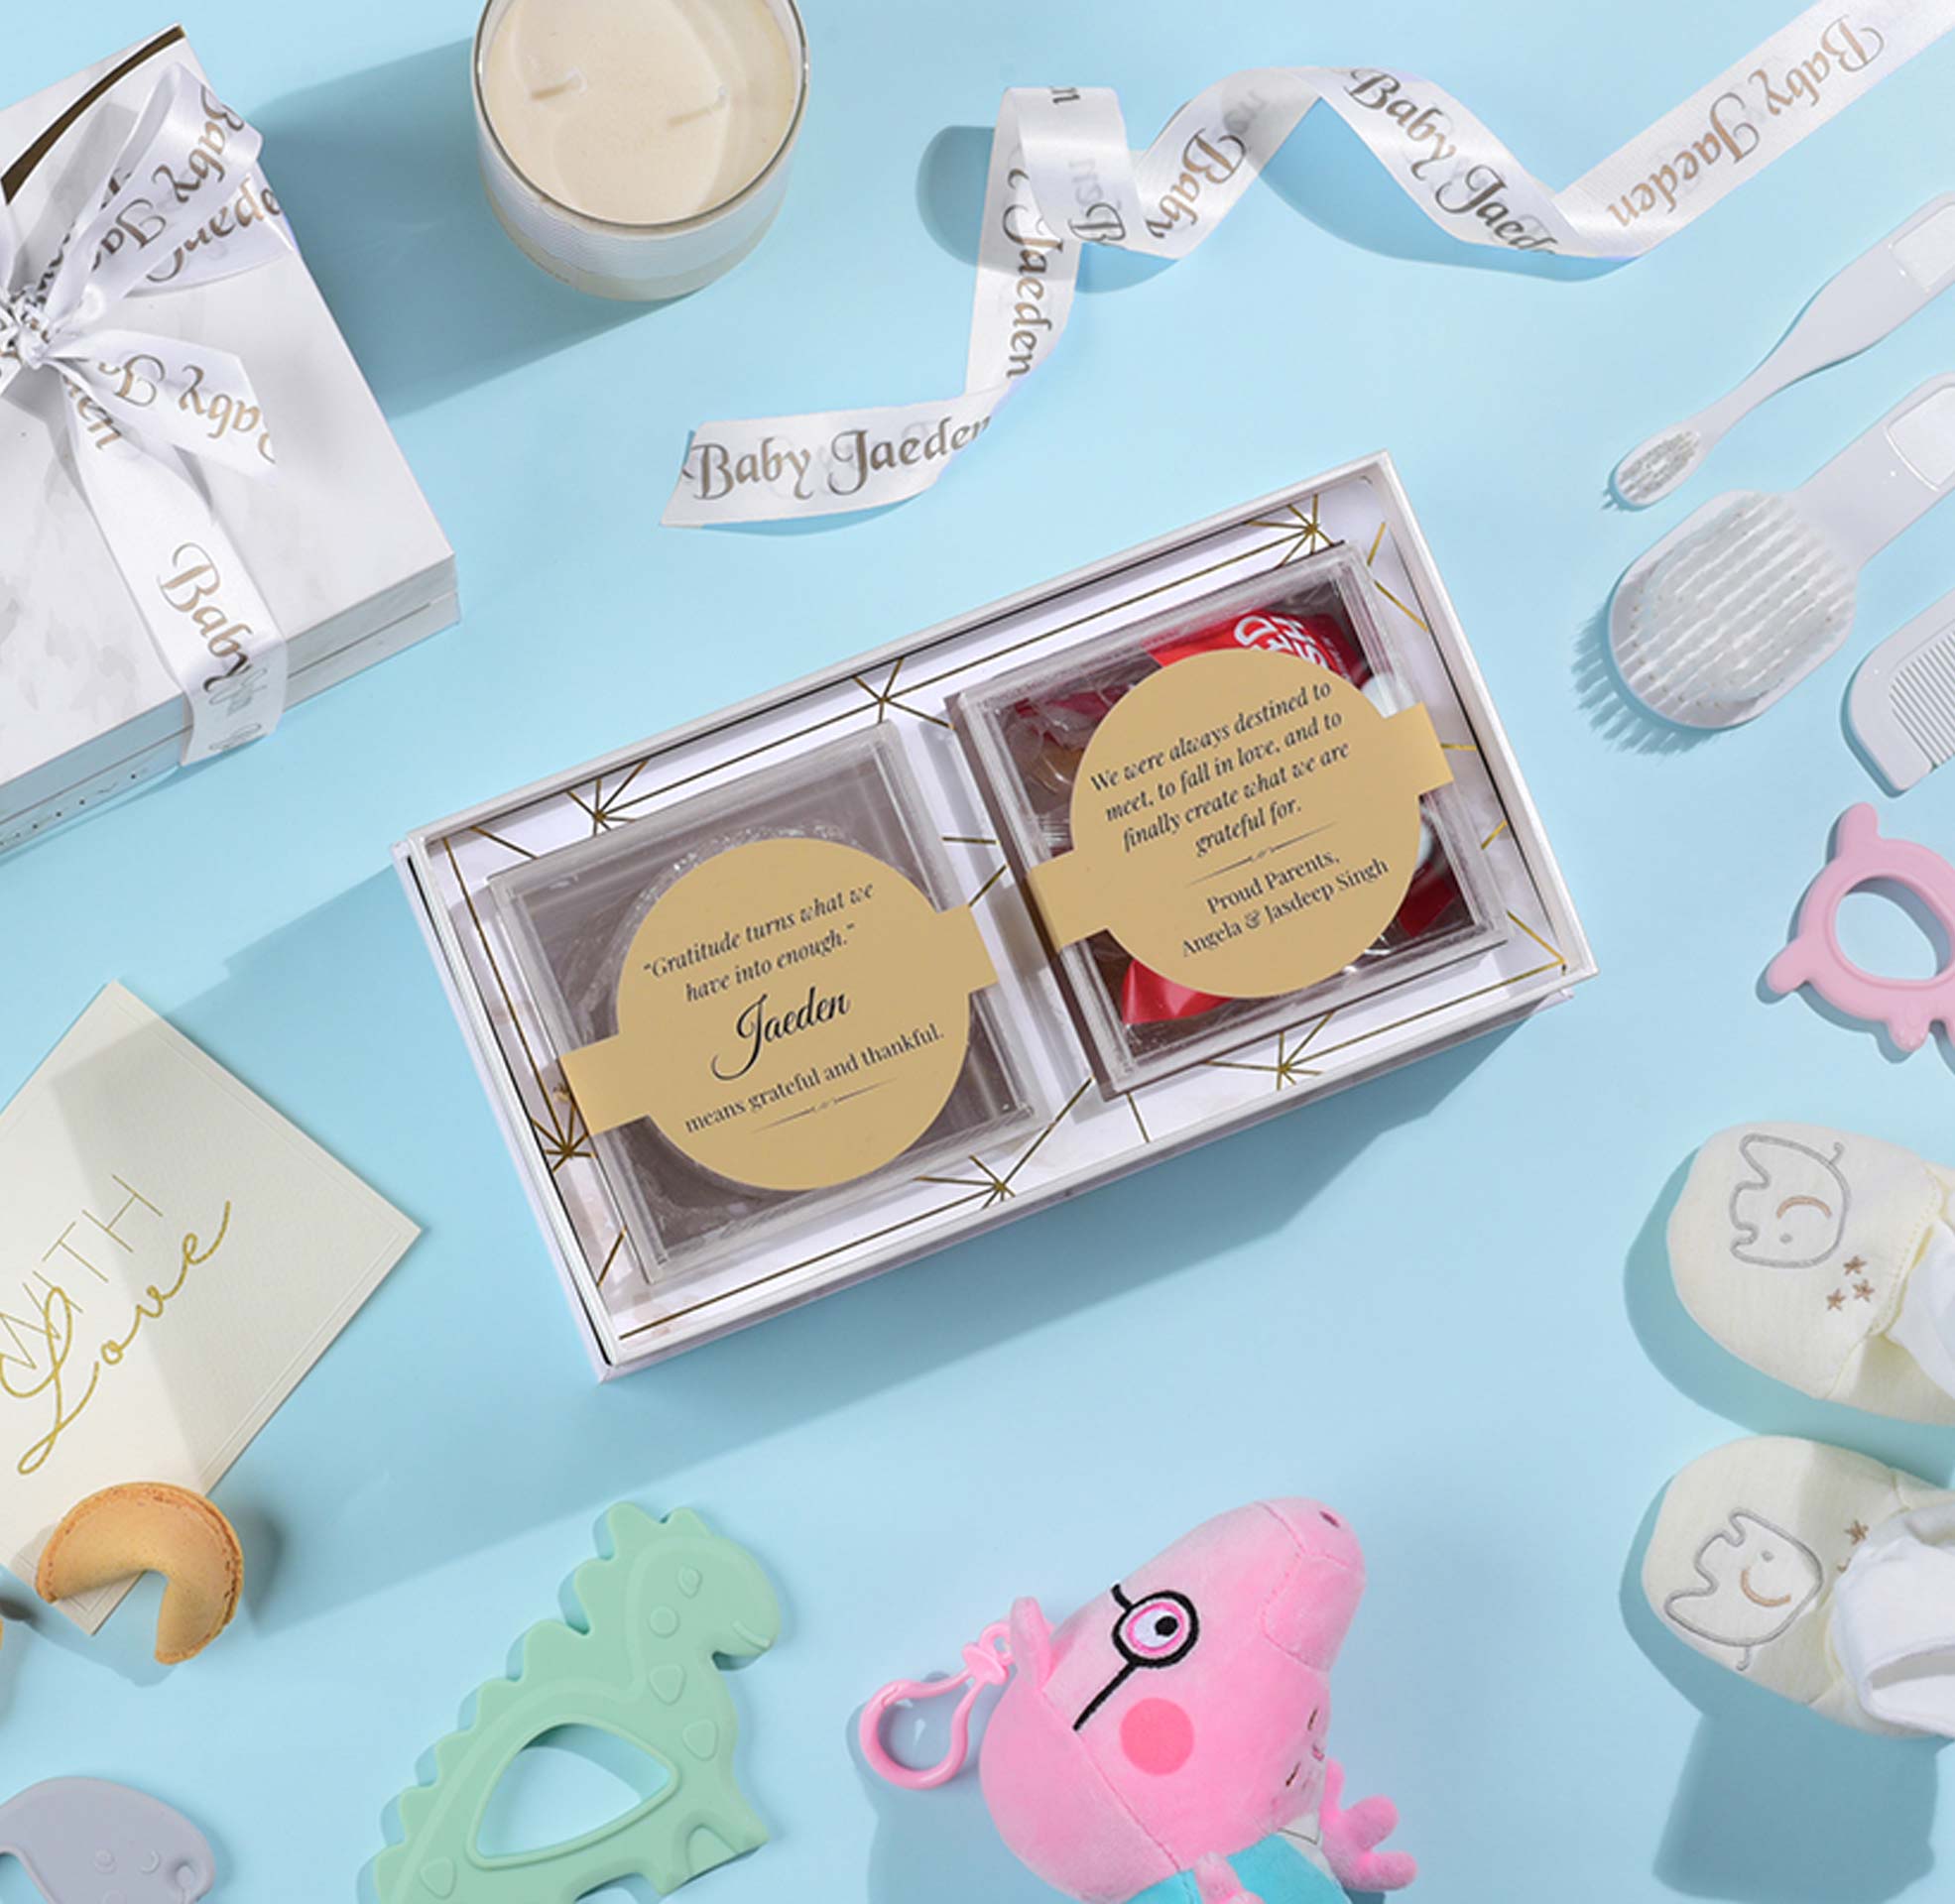 32 Gifts for New Parents: Gift Ideas for First-Time Moms & Dads